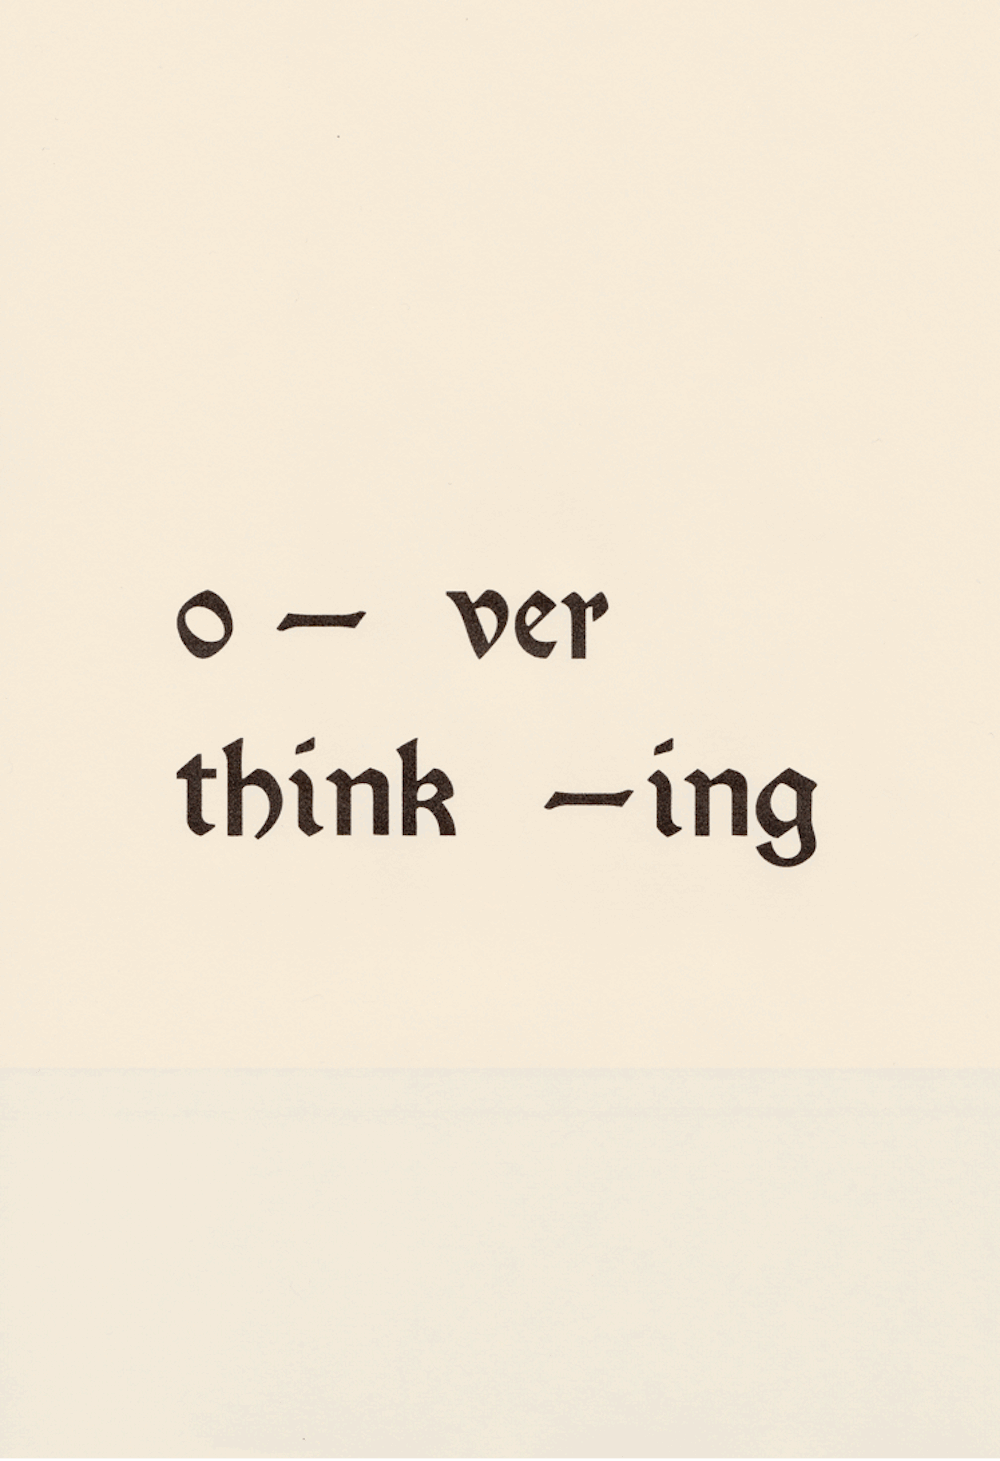 Over Thinking